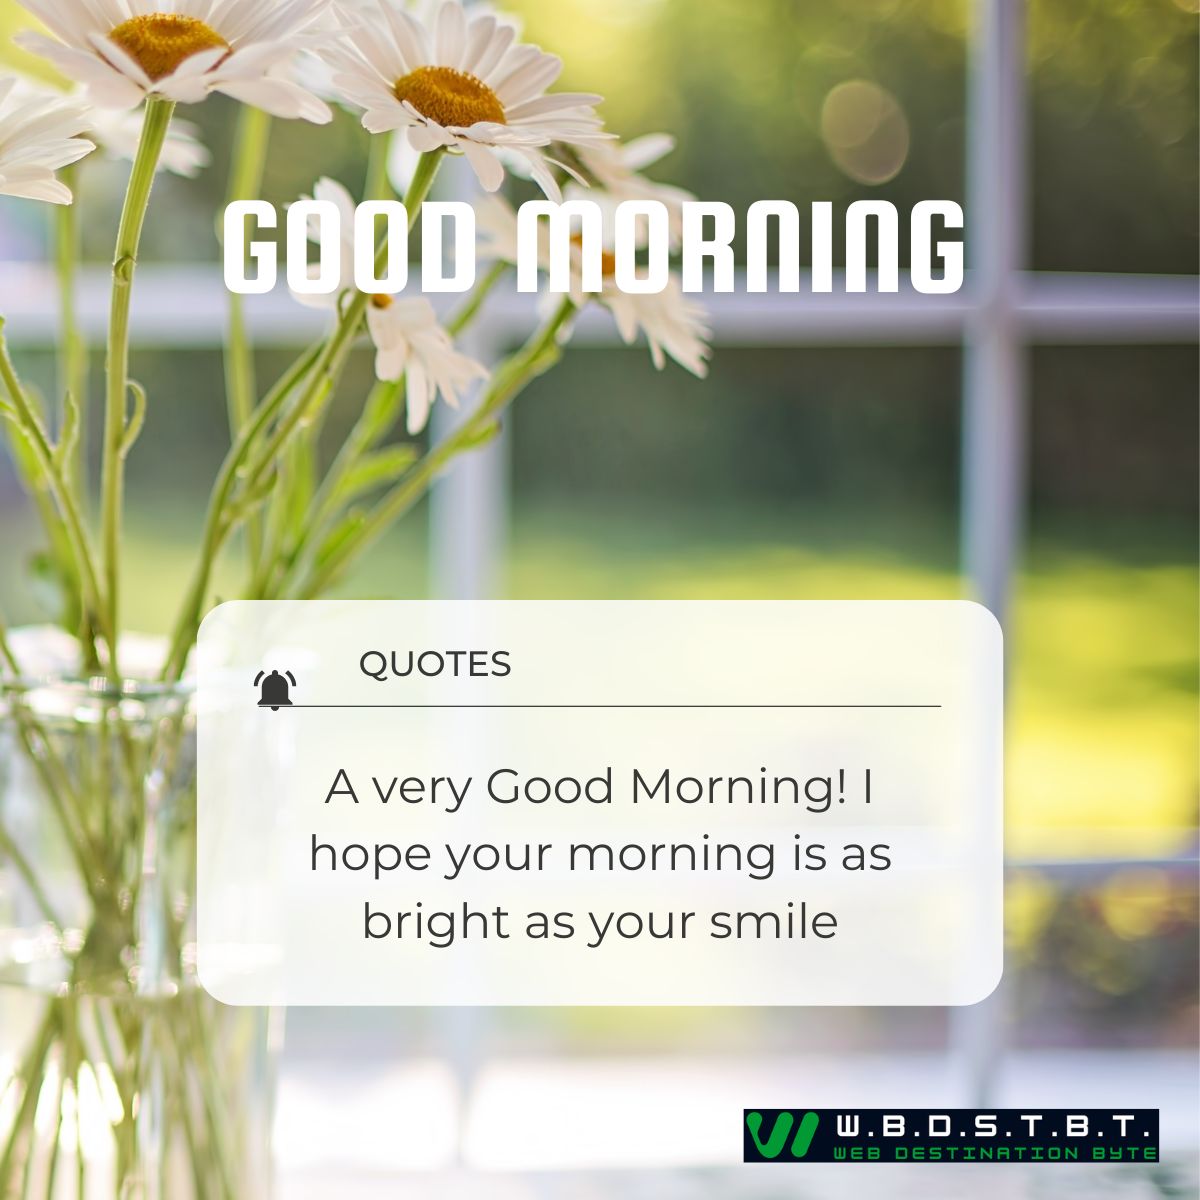 A very Good Morning! I hope your morning is as bright as your smile